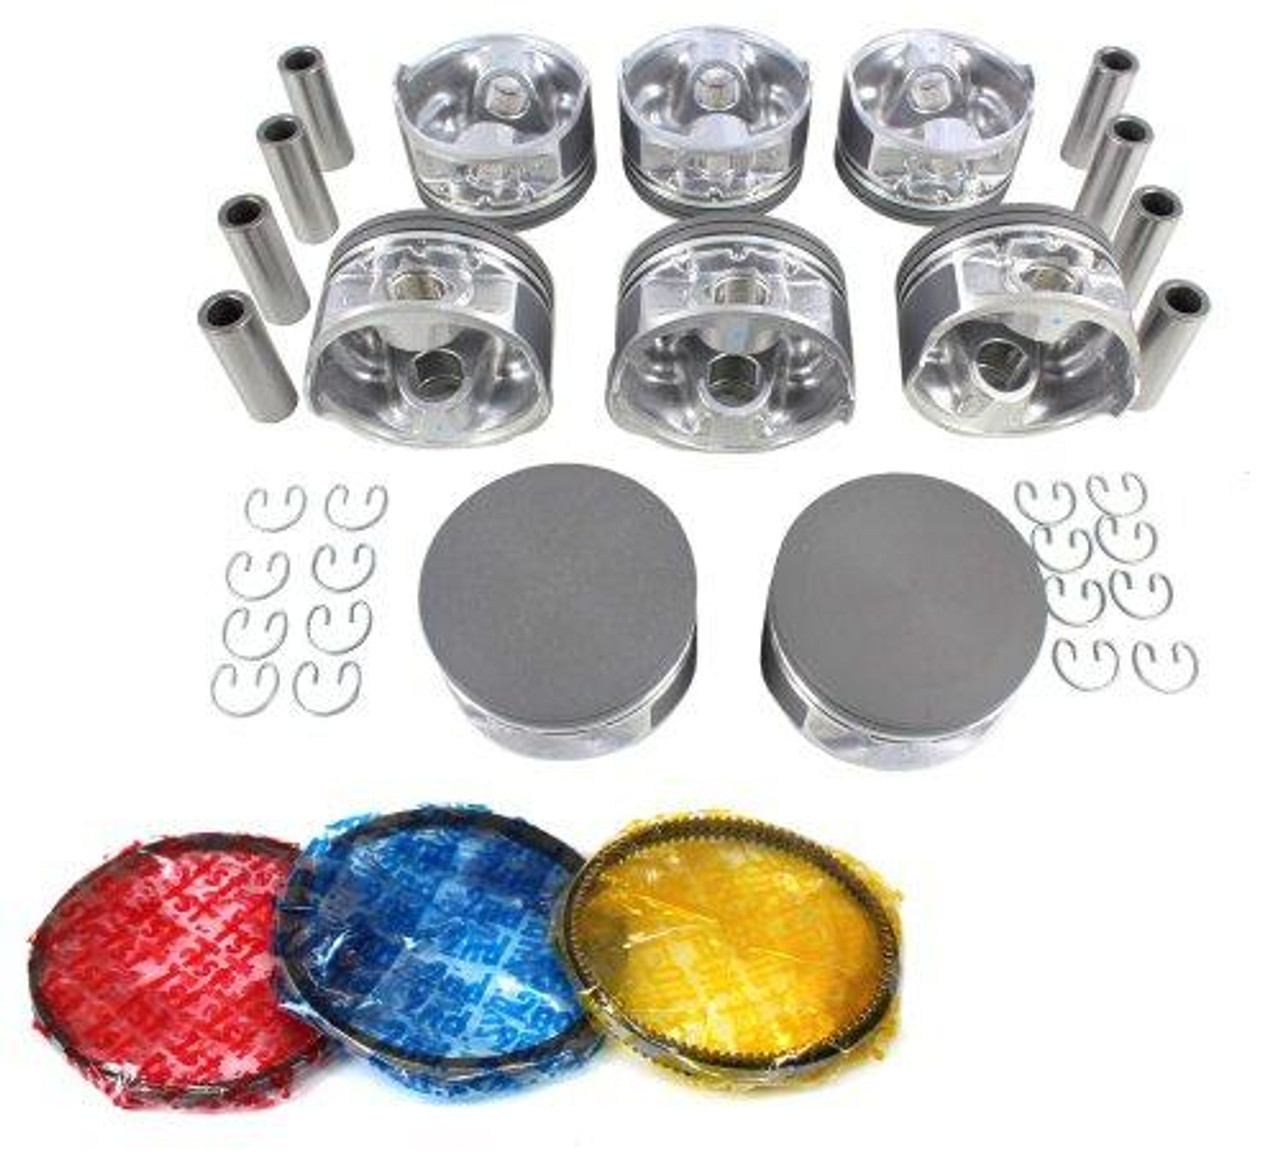 Piston Set with Rings - 2005 Lincoln Aviator 4.6L Engine Parts # PRK4171ZE15